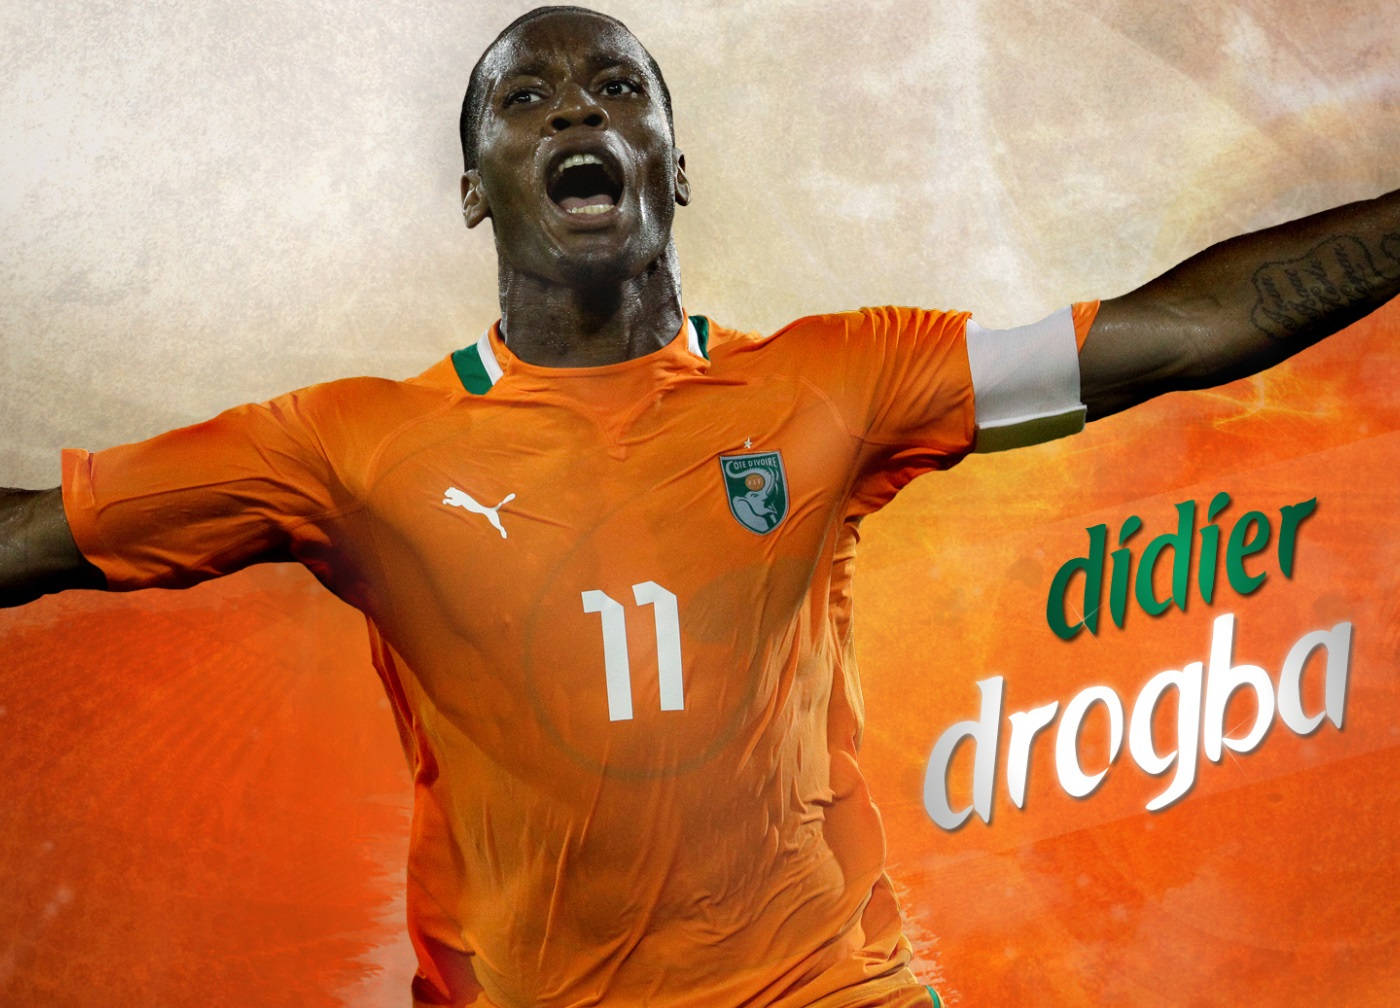 Download wallpaper Chelsea, Chelsea, Drogba, Didier Drogba, section sports  in resolution 1920x1080